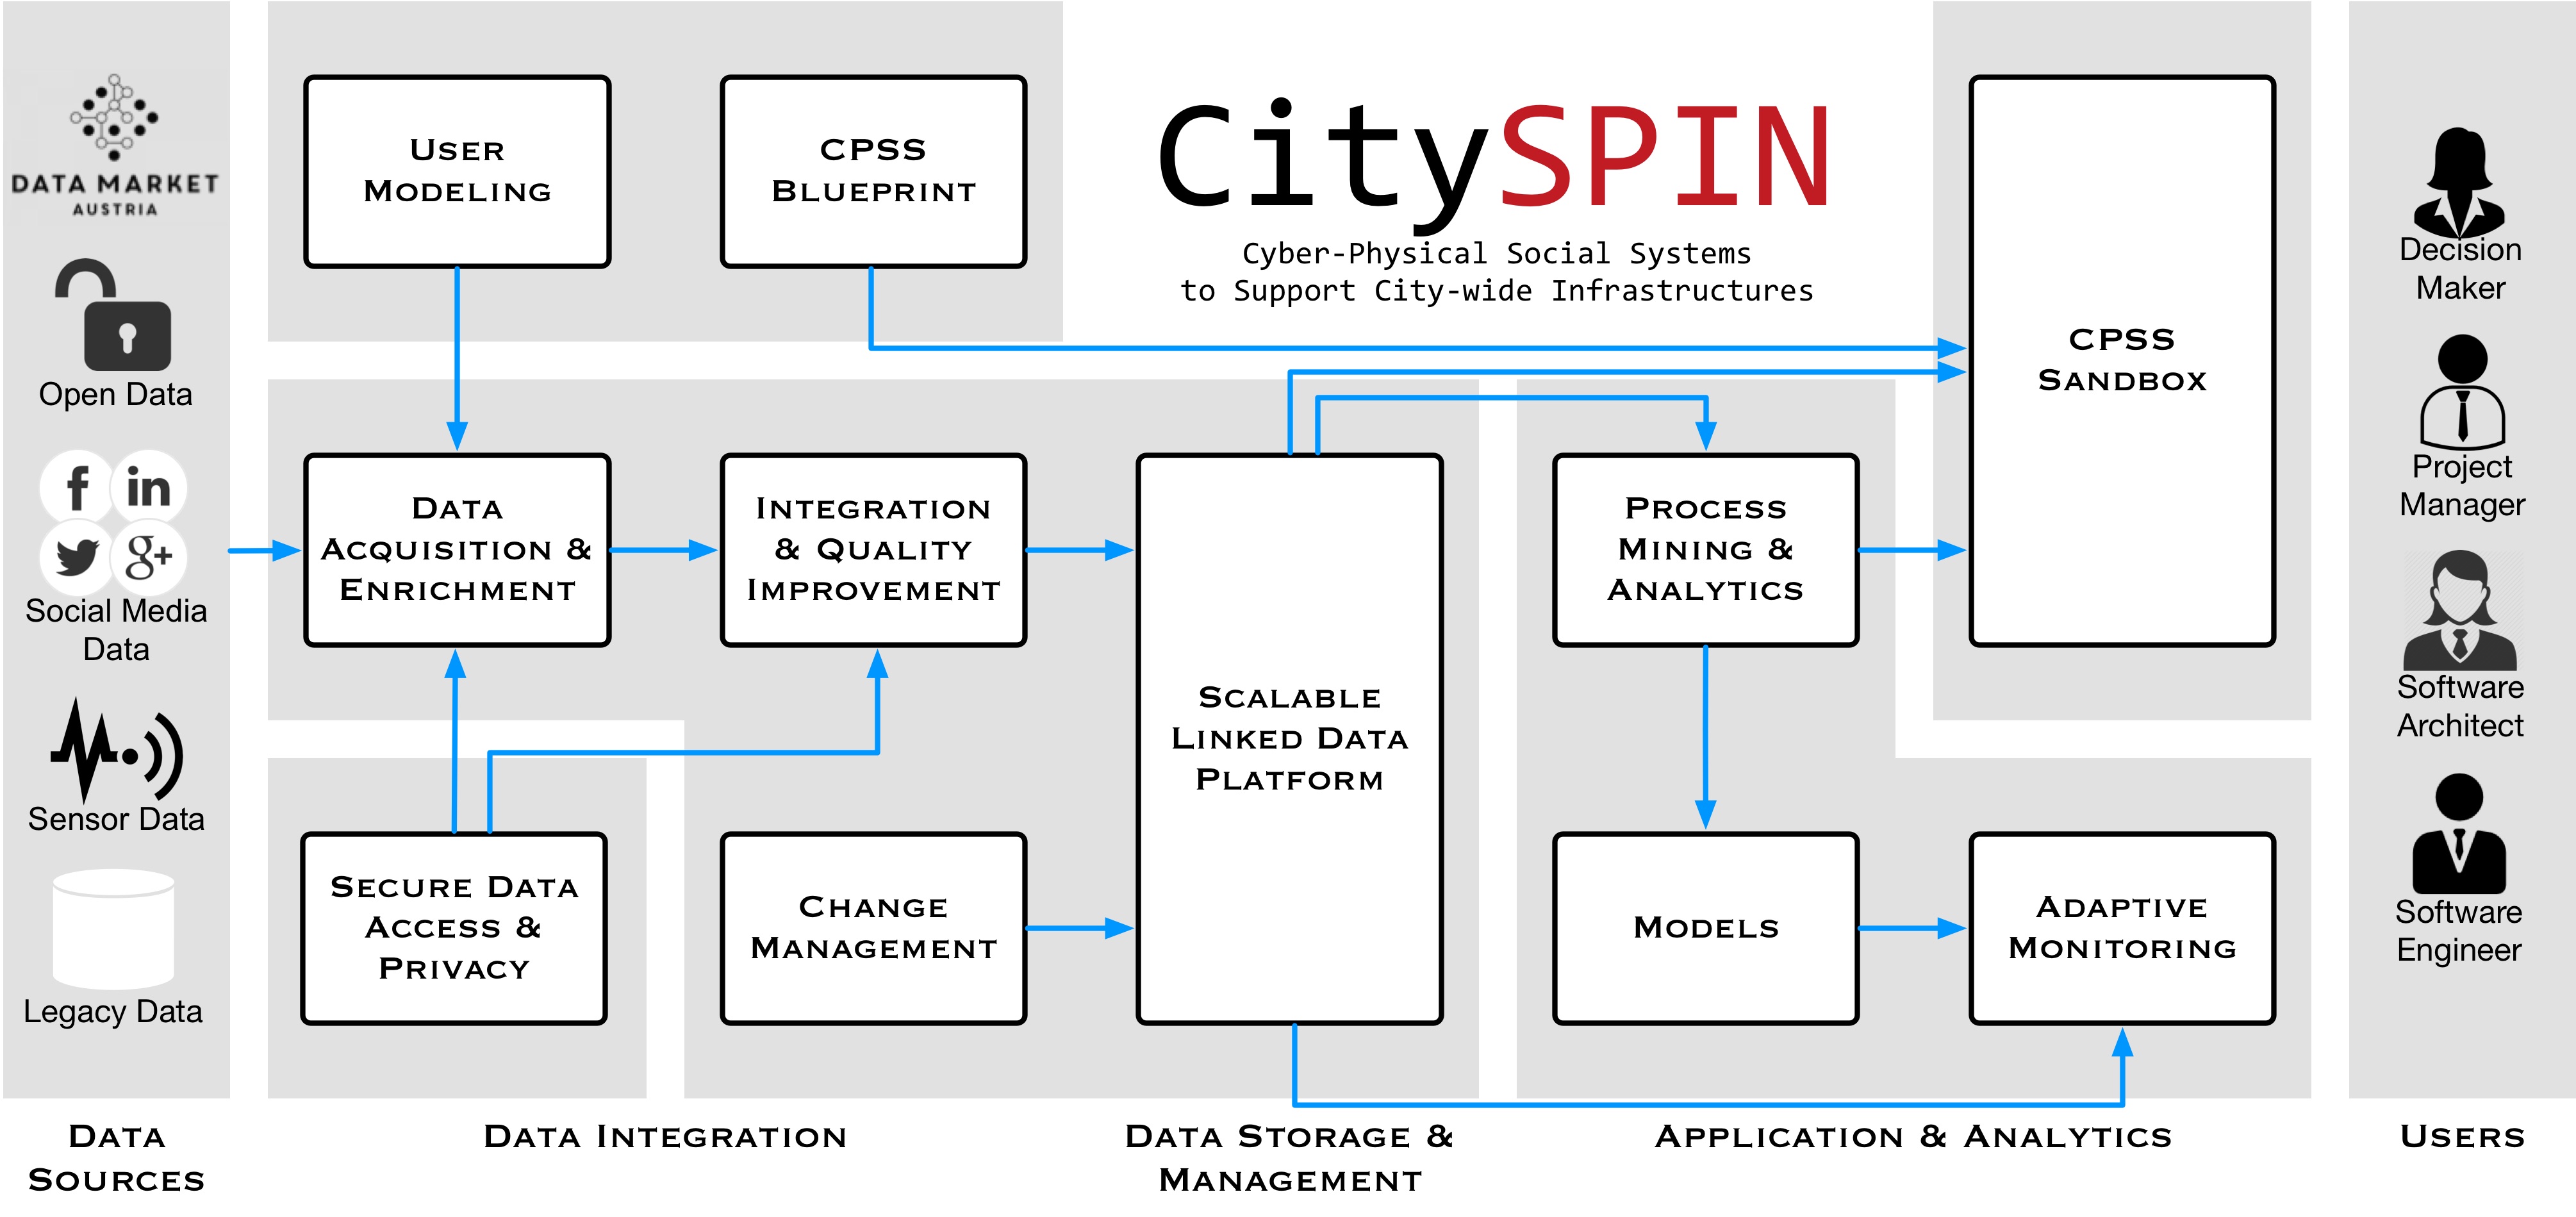 CitySPIN conceptual components and their connections